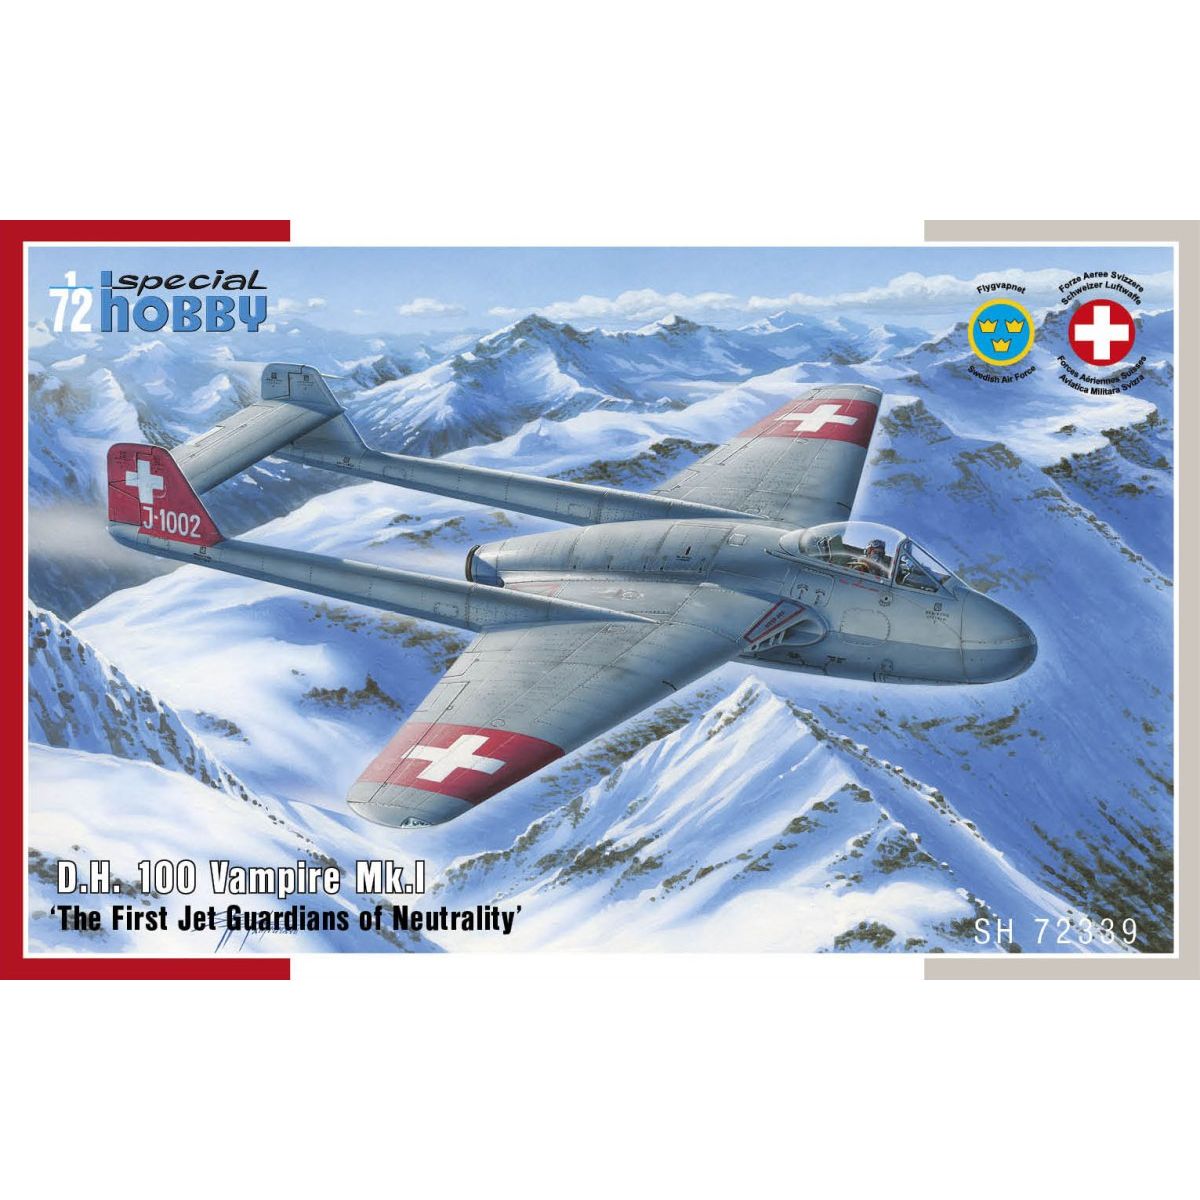 SPECIAL HOBBY 1/72 DH.100 Vampire Mk.I "The First Jet Guardians of Neutrality"